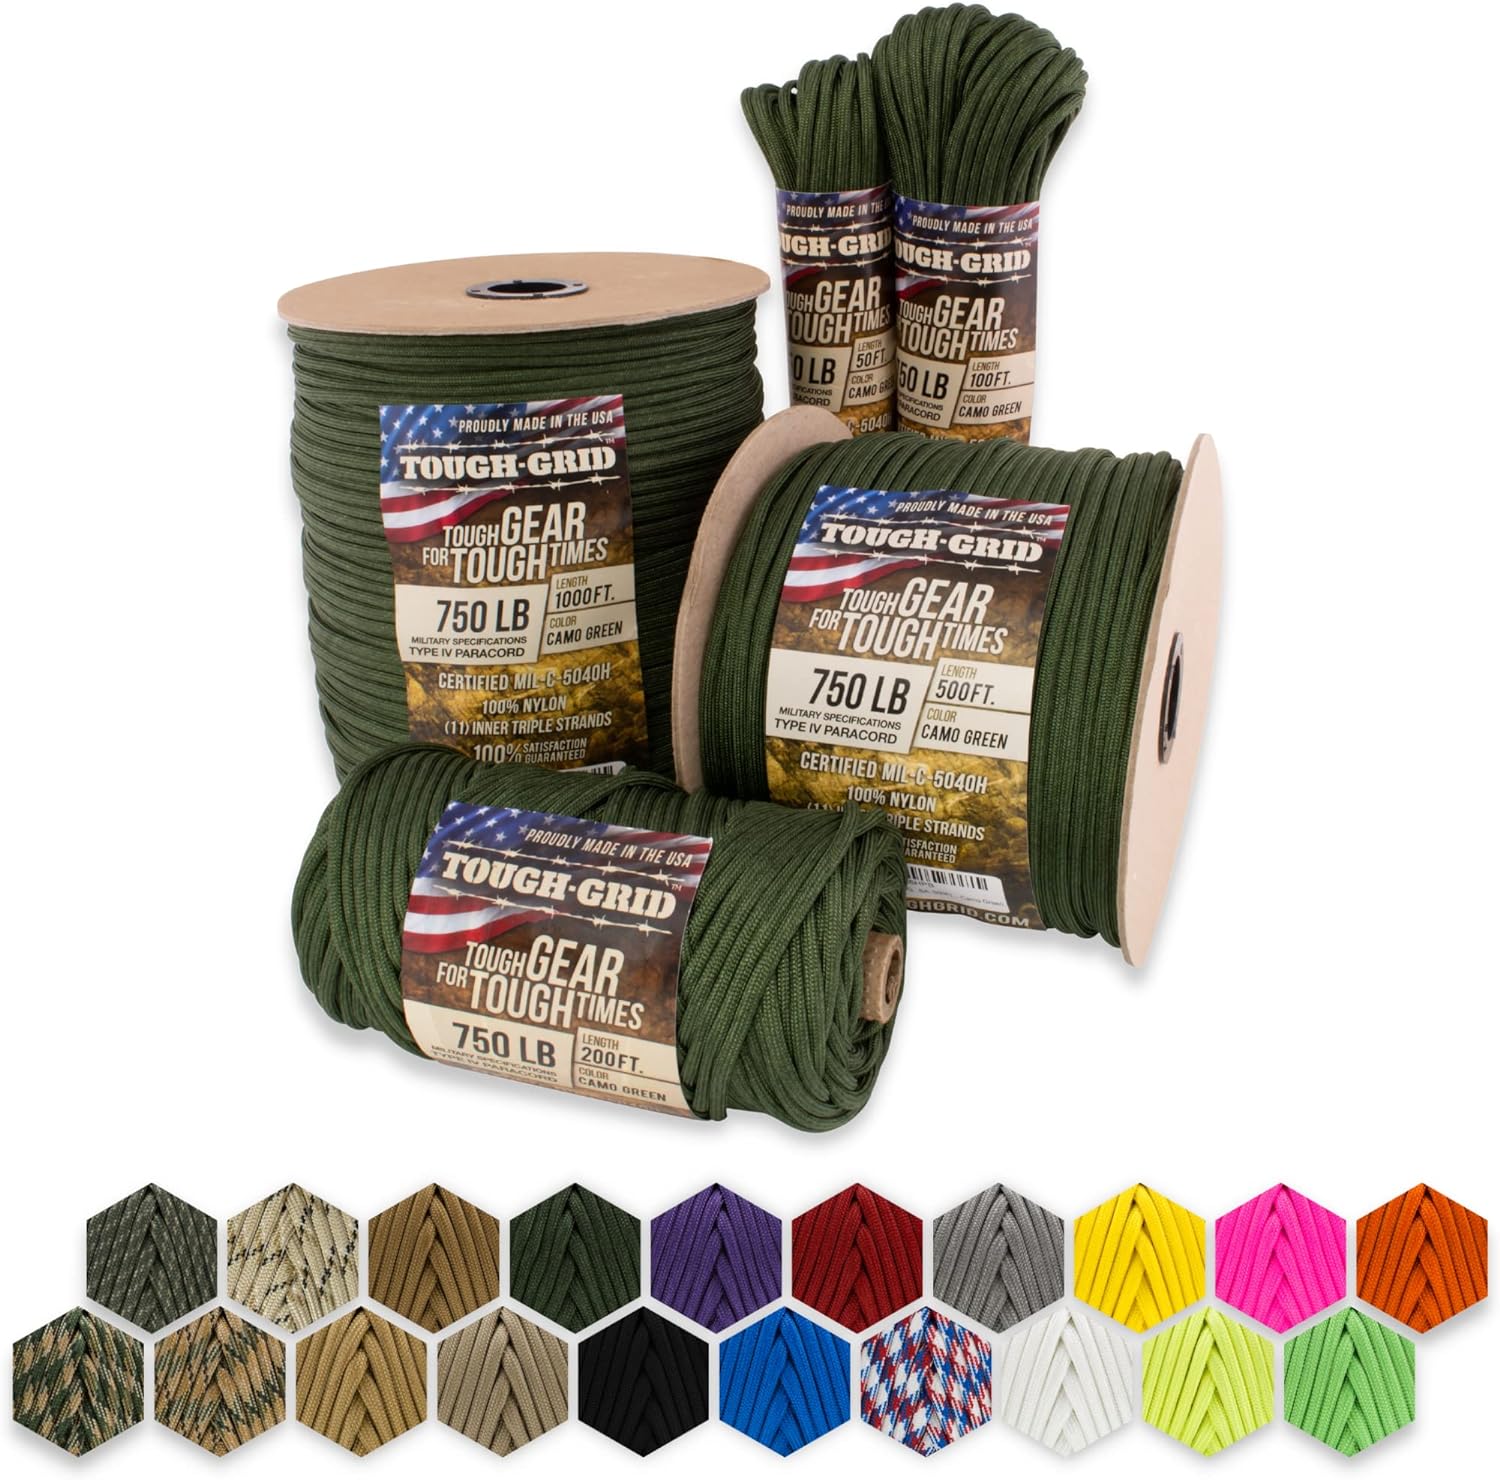 TOUGH-GRID Premium 750lb Paracord - 100% Nylon Type IV Mil-Spec - UV & Abrasion Resistant - Heavy Duty Strands - Outdoor Survival - Used by US Military for Dad - 50 ft to 1000 ft